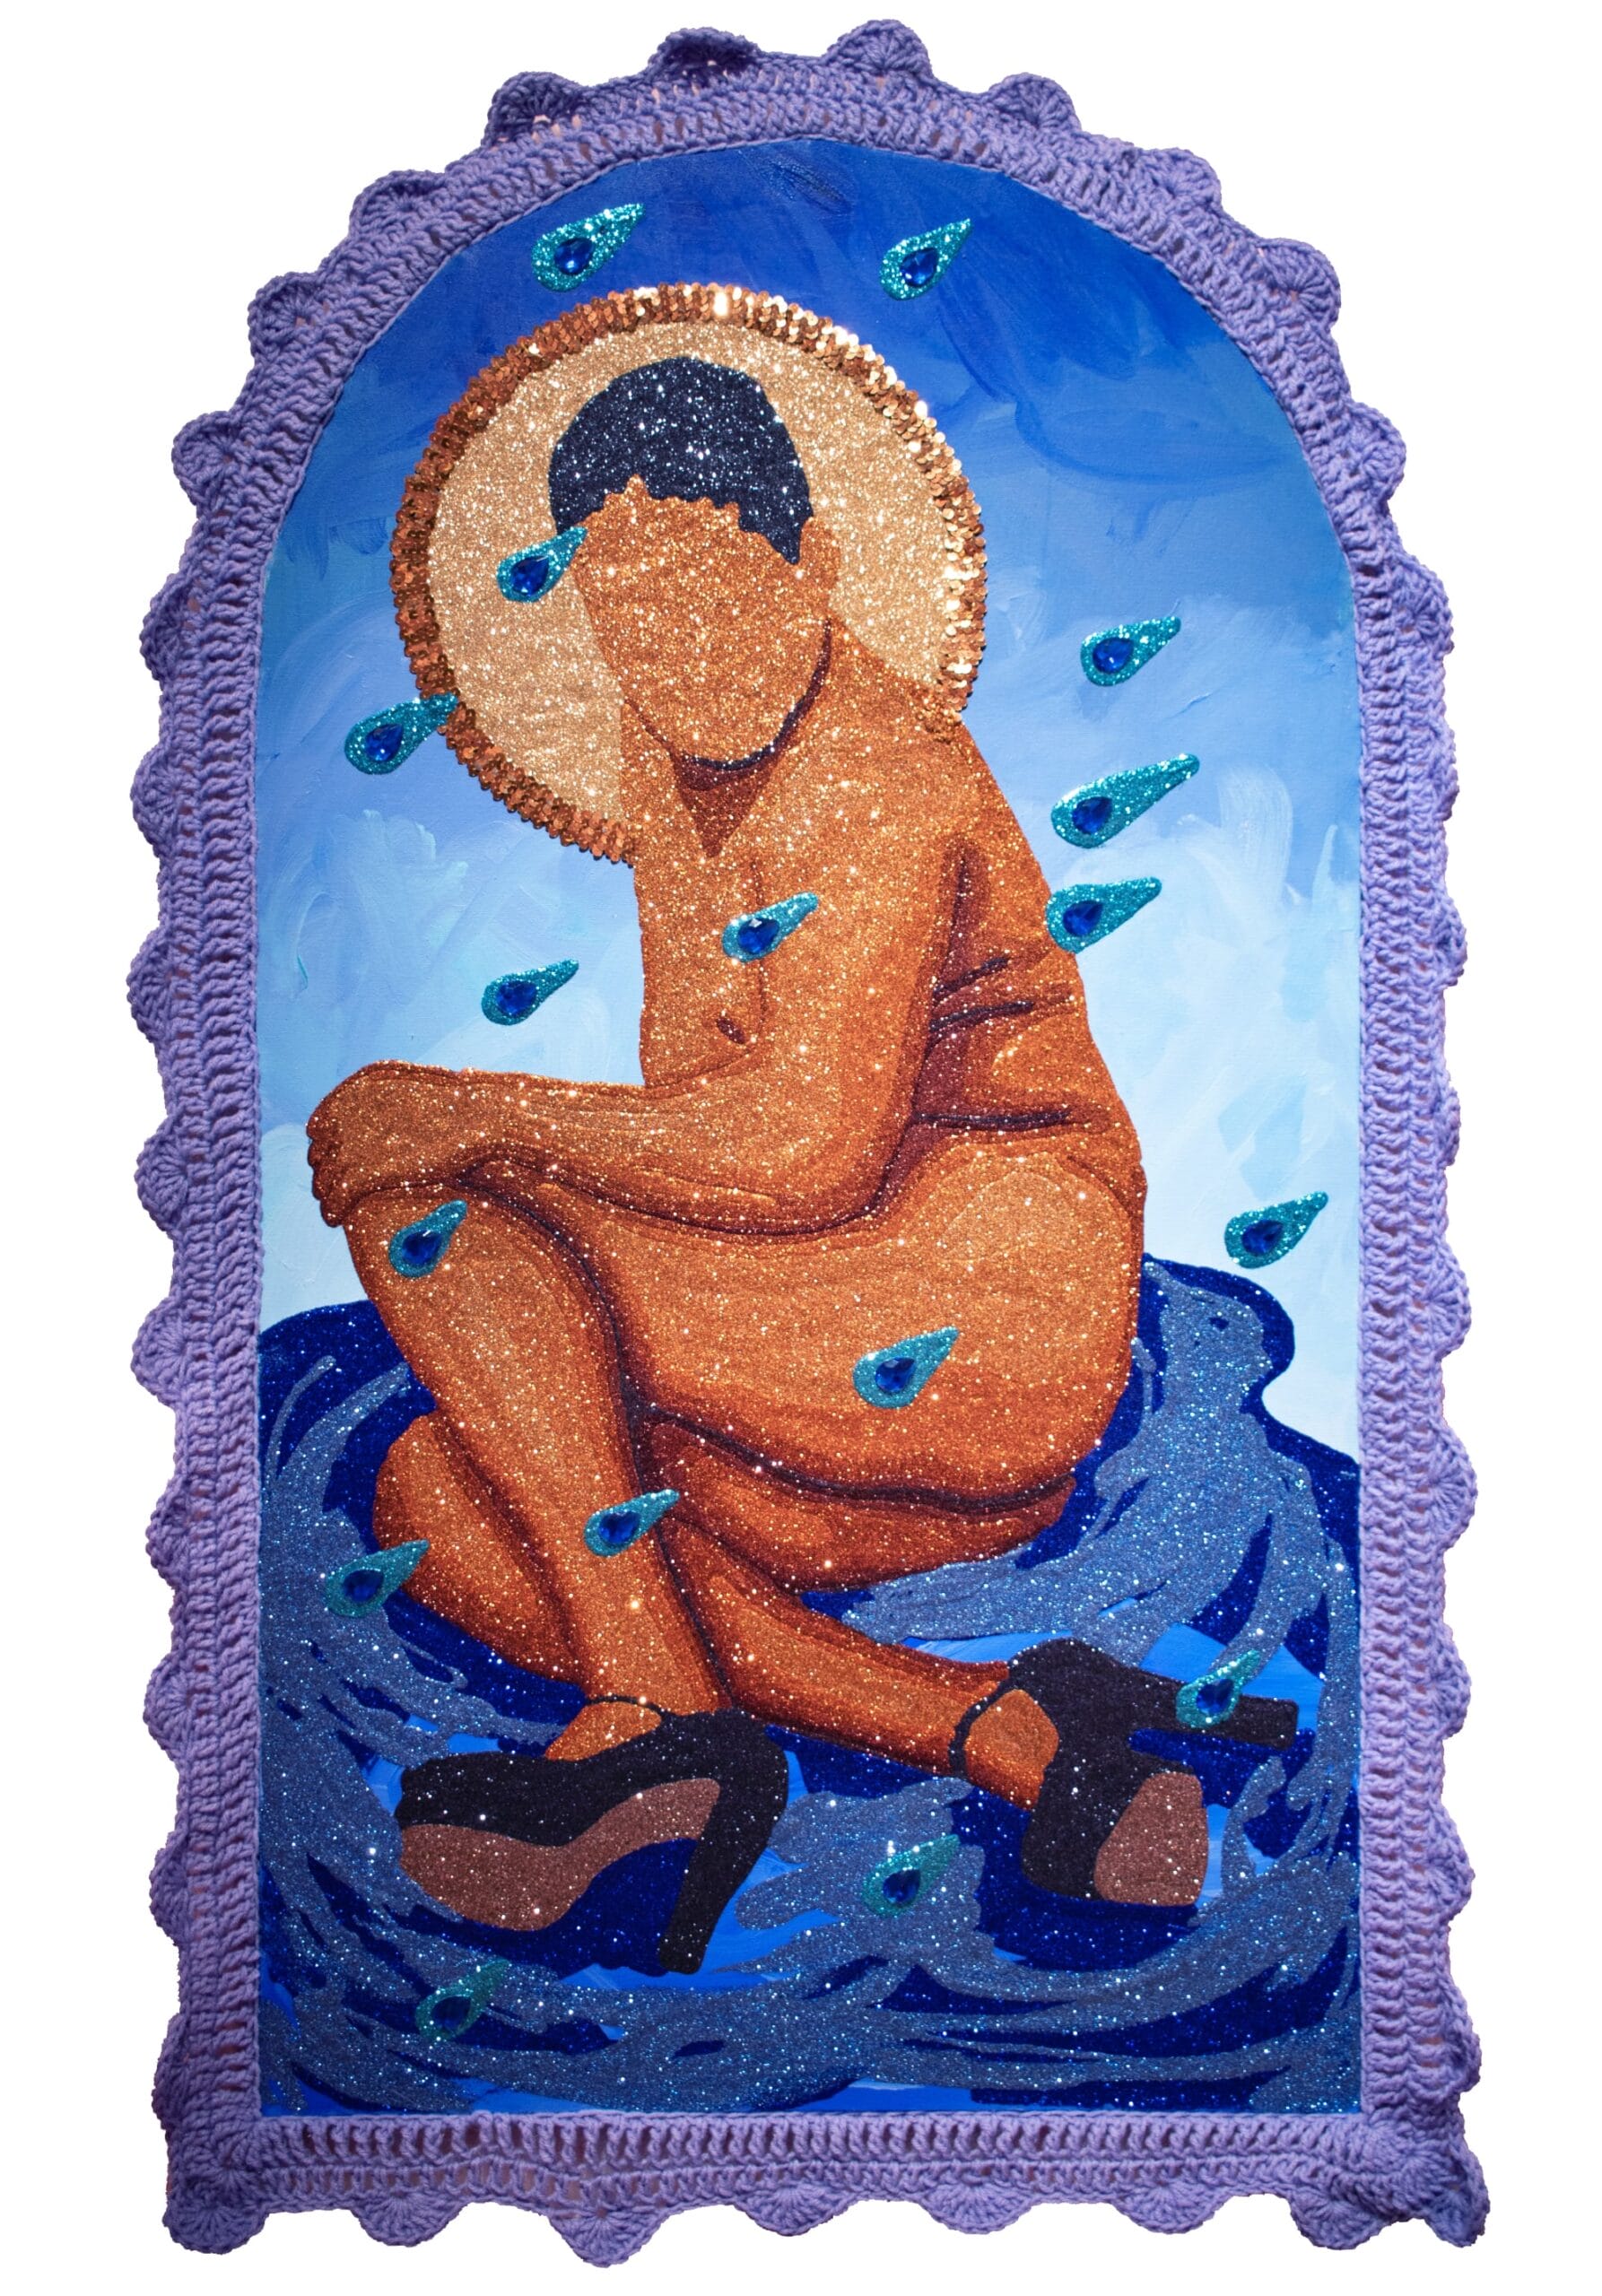 a nude, faceless figure wearing black heels sits on blue textiles with a purple crocheted frame